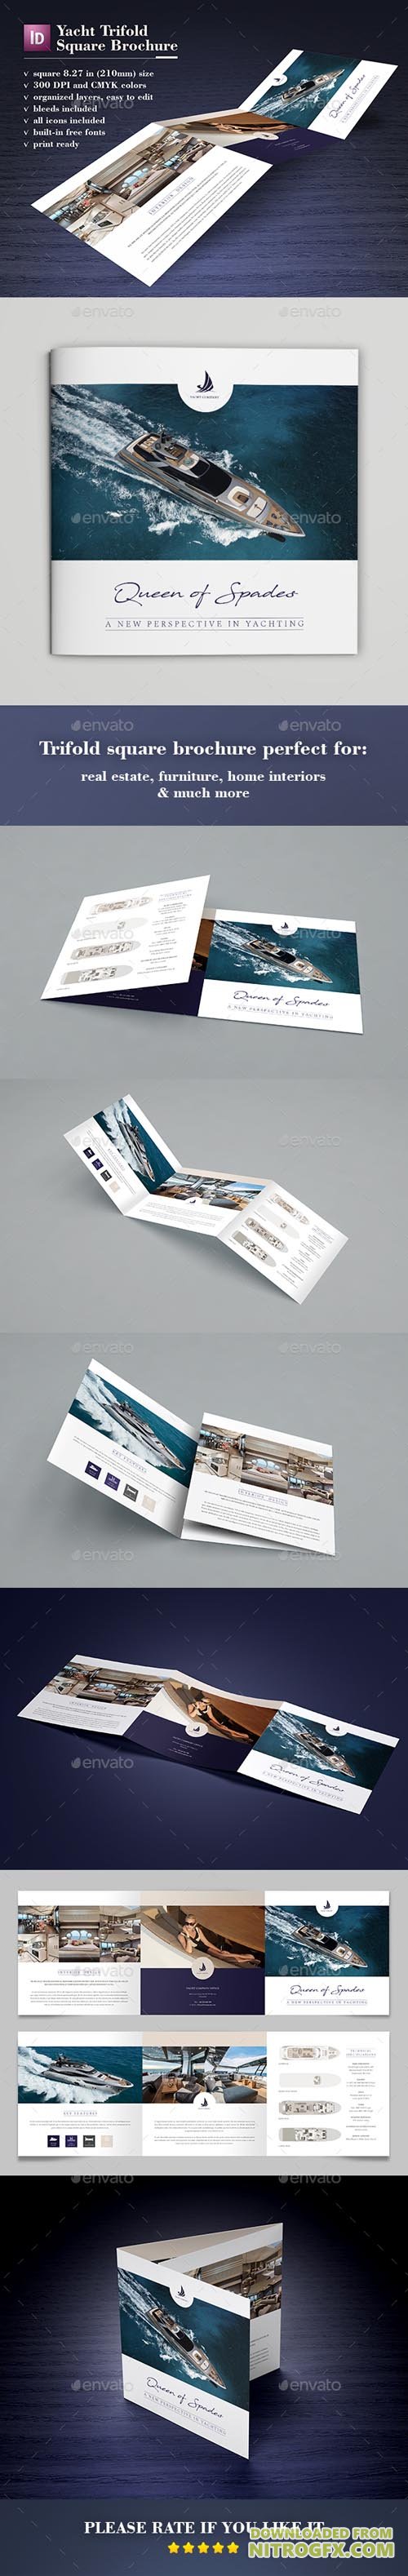 GraphicRiver - Yacht Trifold Square Brochure - 20405848